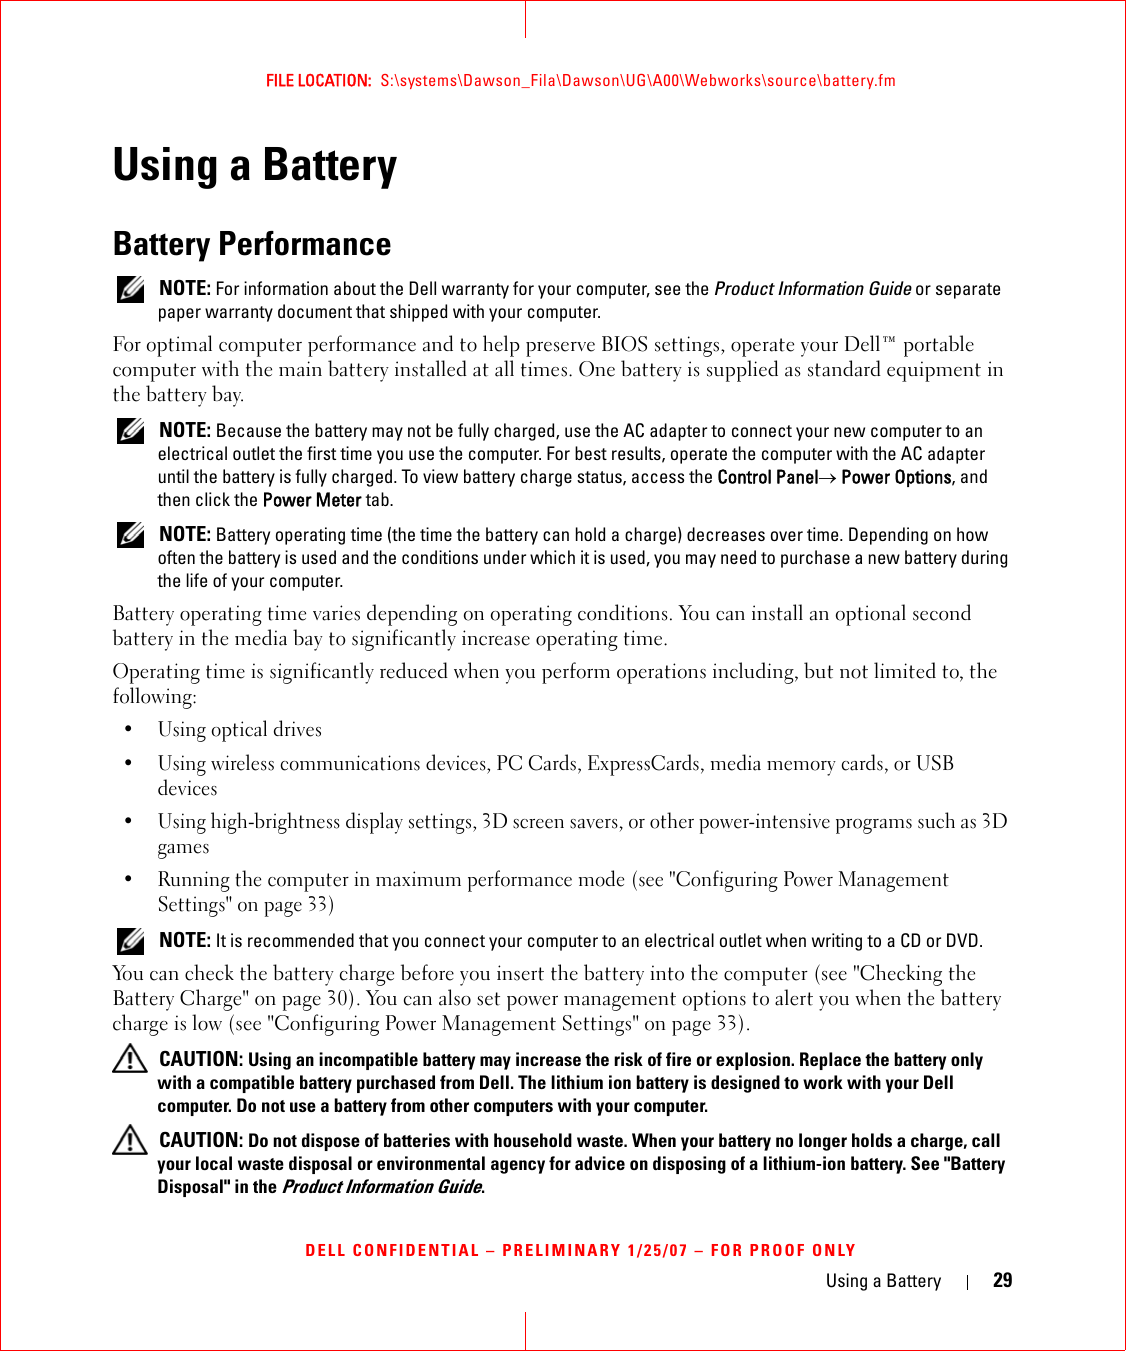 Using a Battery 29FILE LOCATION:  S:\systems\Dawson_Fila\Dawson\UG\A00\Webworks\source\battery.fmDELL CONFIDENTIAL – PRELIMINARY 1/25/07 – FOR PROOF ONLYUsing a BatteryBattery Performance NOTE: For information about the Dell warranty for your computer, see the Product Information Guide or separate paper warranty document that shipped with your computer.For optimal computer performance and to help preserve BIOS settings, operate your Dell™ portable computer with the main battery installed at all times. One battery is supplied as standard equipment in the battery bay. NOTE: Because the battery may not be fully charged, use the AC adapter to connect your new computer to an electrical outlet the first time you use the computer. For best results, operate the computer with the AC adapter until the battery is fully charged. To view battery charge status, access the Control Panel→ Power Options, and then click the Power Meter tab. NOTE: Battery operating time (the time the battery can hold a charge) decreases over time. Depending on how often the battery is used and the conditions under which it is used, you may need to purchase a new battery during the life of your computer.Battery operating time varies depending on operating conditions. You can install an optional second battery in the media bay to significantly increase operating time.Operating time is significantly reduced when you perform operations including, but not limited to, the following:•Using optical drives• Using wireless communications devices, PC Cards, ExpressCards, media memory cards, or USB devices• Using high-brightness display settings, 3D screen savers, or other power-intensive programs such as 3D games• Running the computer in maximum performance mode (see &quot;Configuring Power Management Settings&quot; on page 33) NOTE: It is recommended that you connect your computer to an electrical outlet when writing to a CD or DVD.You can check the battery charge before you insert the battery into the computer (see &quot;Checking the Battery Charge&quot; on page 30). You can also set power management options to alert you when the battery charge is low (see &quot;Configuring Power Management Settings&quot; on page 33). CAUTION: Using an incompatible battery may increase the risk of fire or explosion. Replace the battery only with a compatible battery purchased from Dell. The lithium ion battery is designed to work with your Dell computer. Do not use a battery from other computers with your computer.  CAUTION: Do not dispose of batteries with household waste. When your battery no longer holds a charge, call your local waste disposal or environmental agency for advice on disposing of a lithium-ion battery. See &quot;Battery Disposal&quot; in the Product Information Guide.